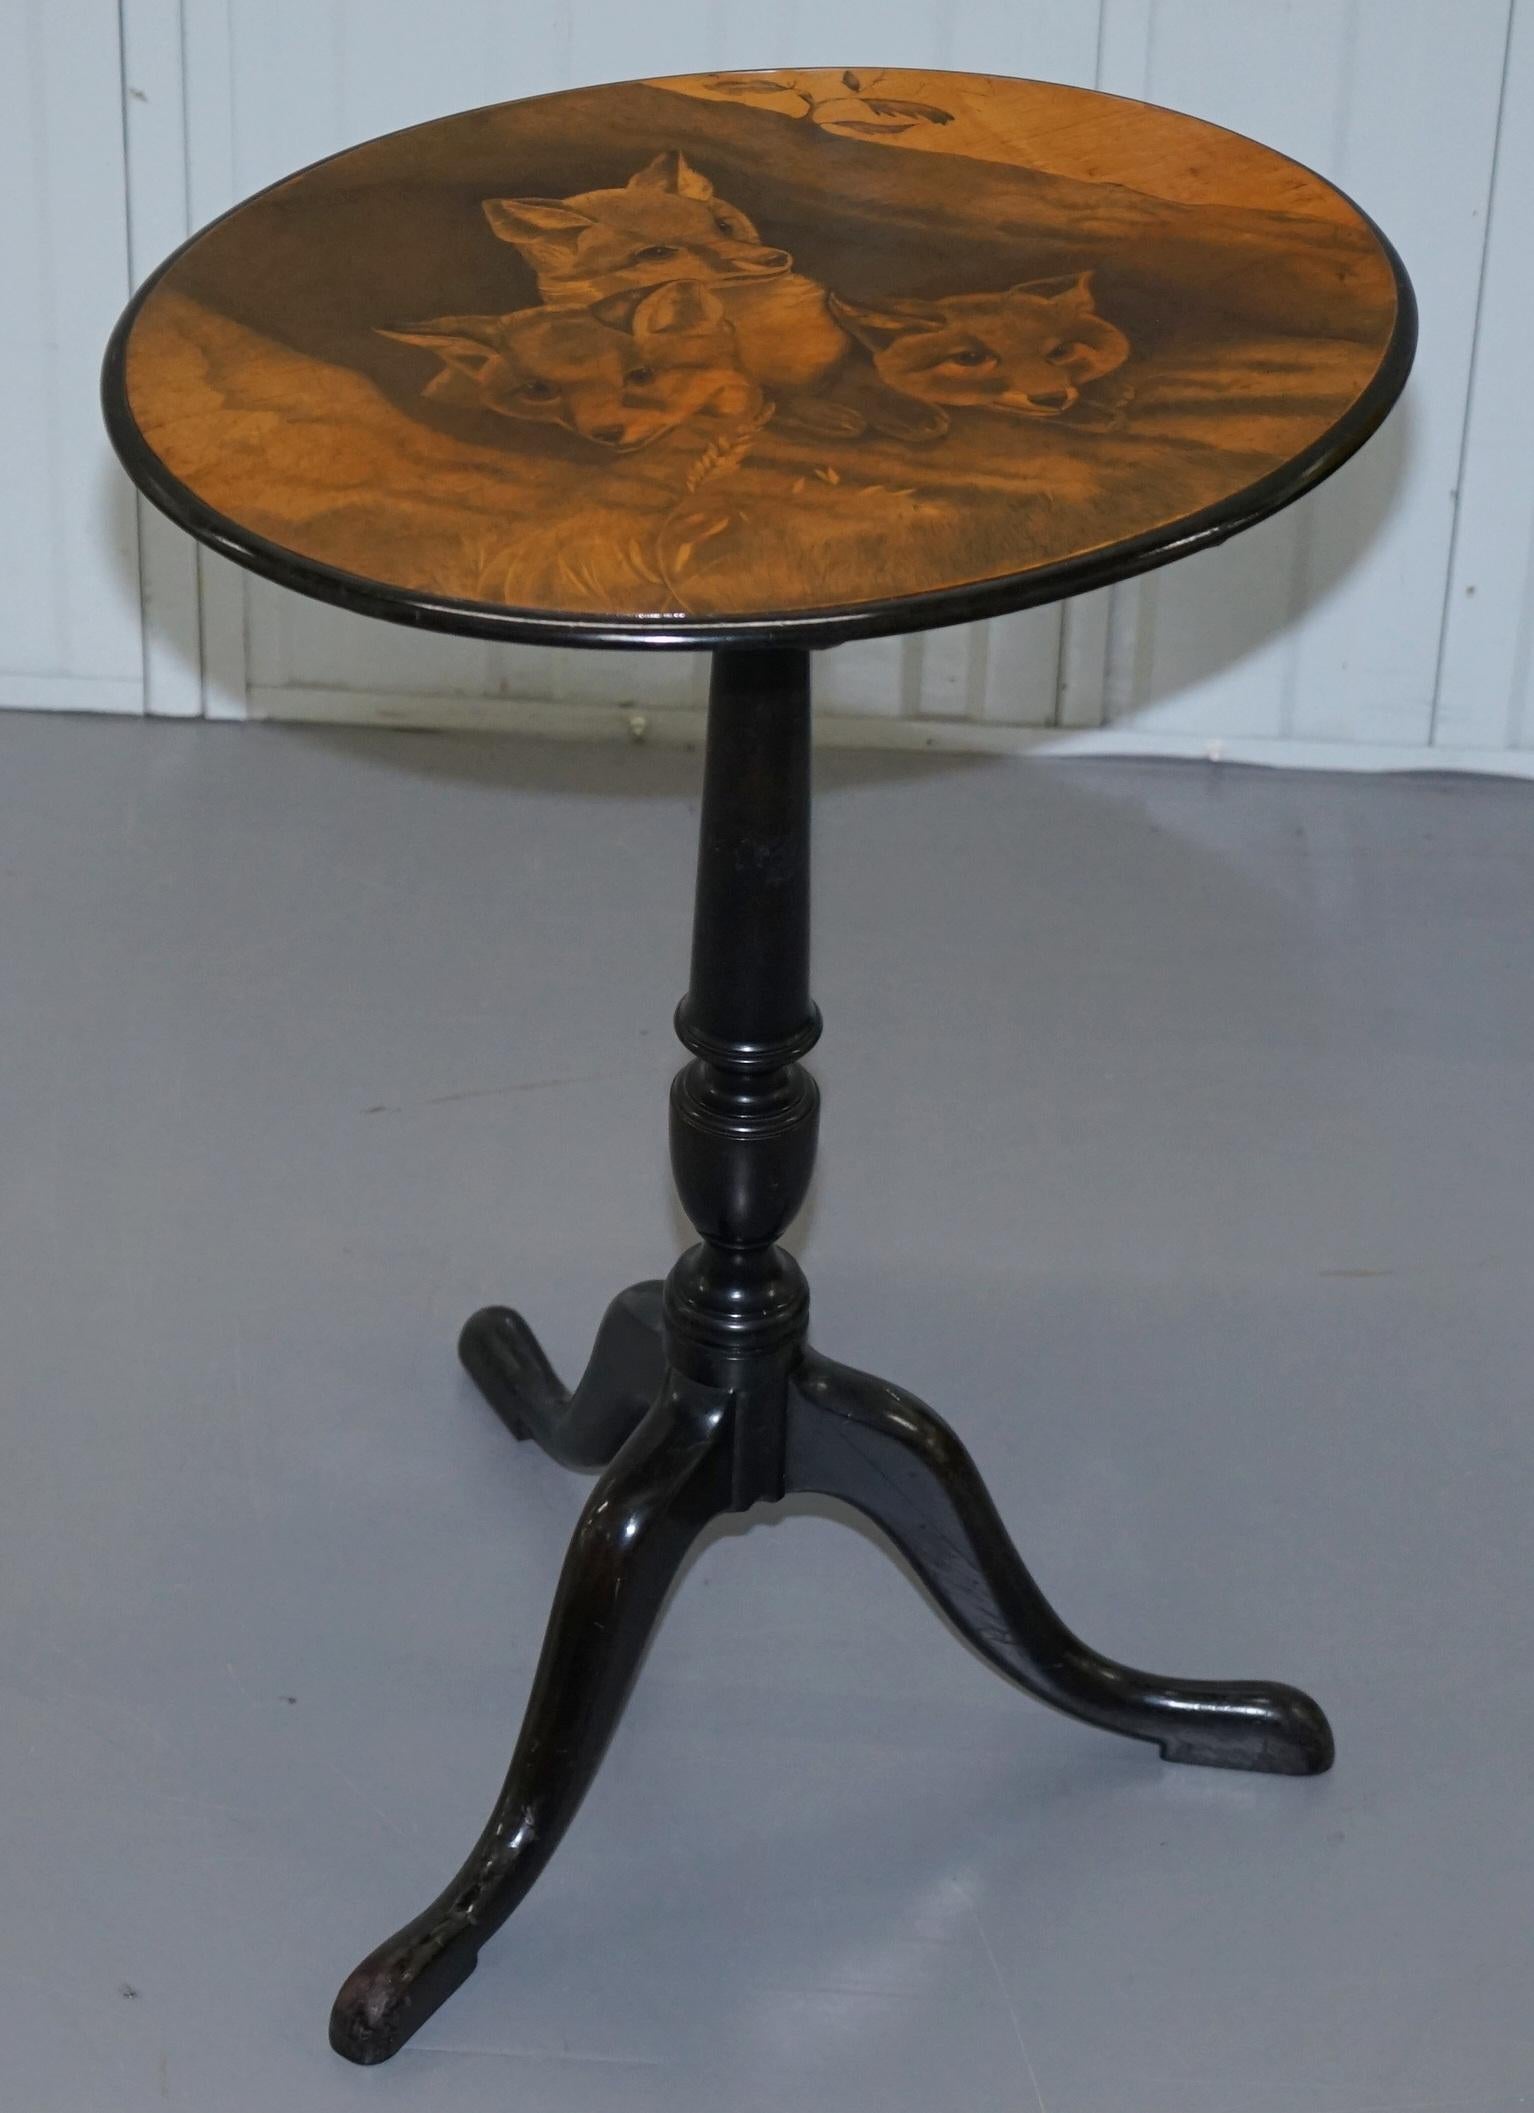 We are delighted to offer for this stunning very rare Victorian tilt top table with pen work drawing of three fox cubs

A very rare piece, I have never seen a penwork table with this level of detail before, the artwork is simply sublime. It